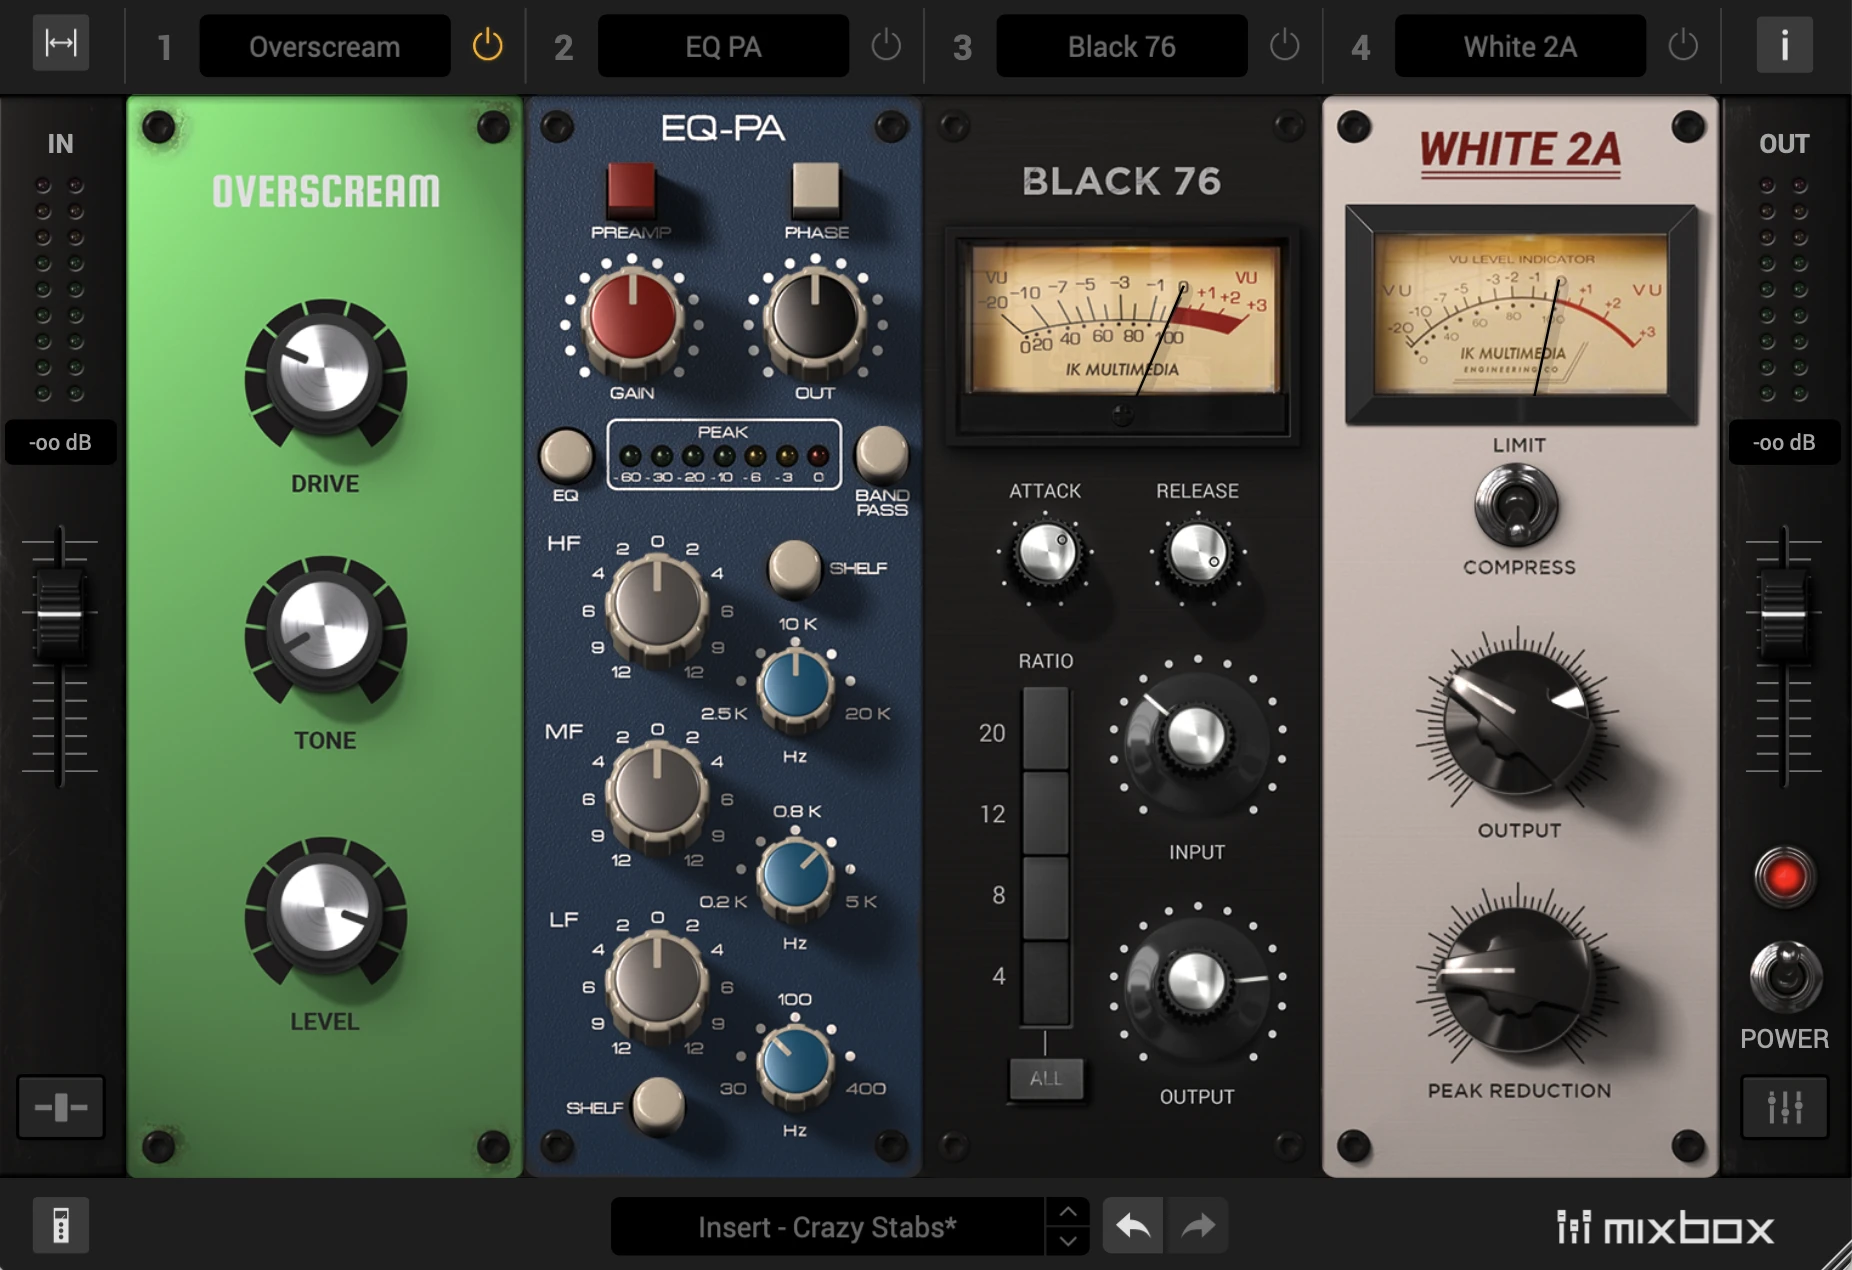 MixBox Effects Rack Plugin For Mixing Music Producers Need This